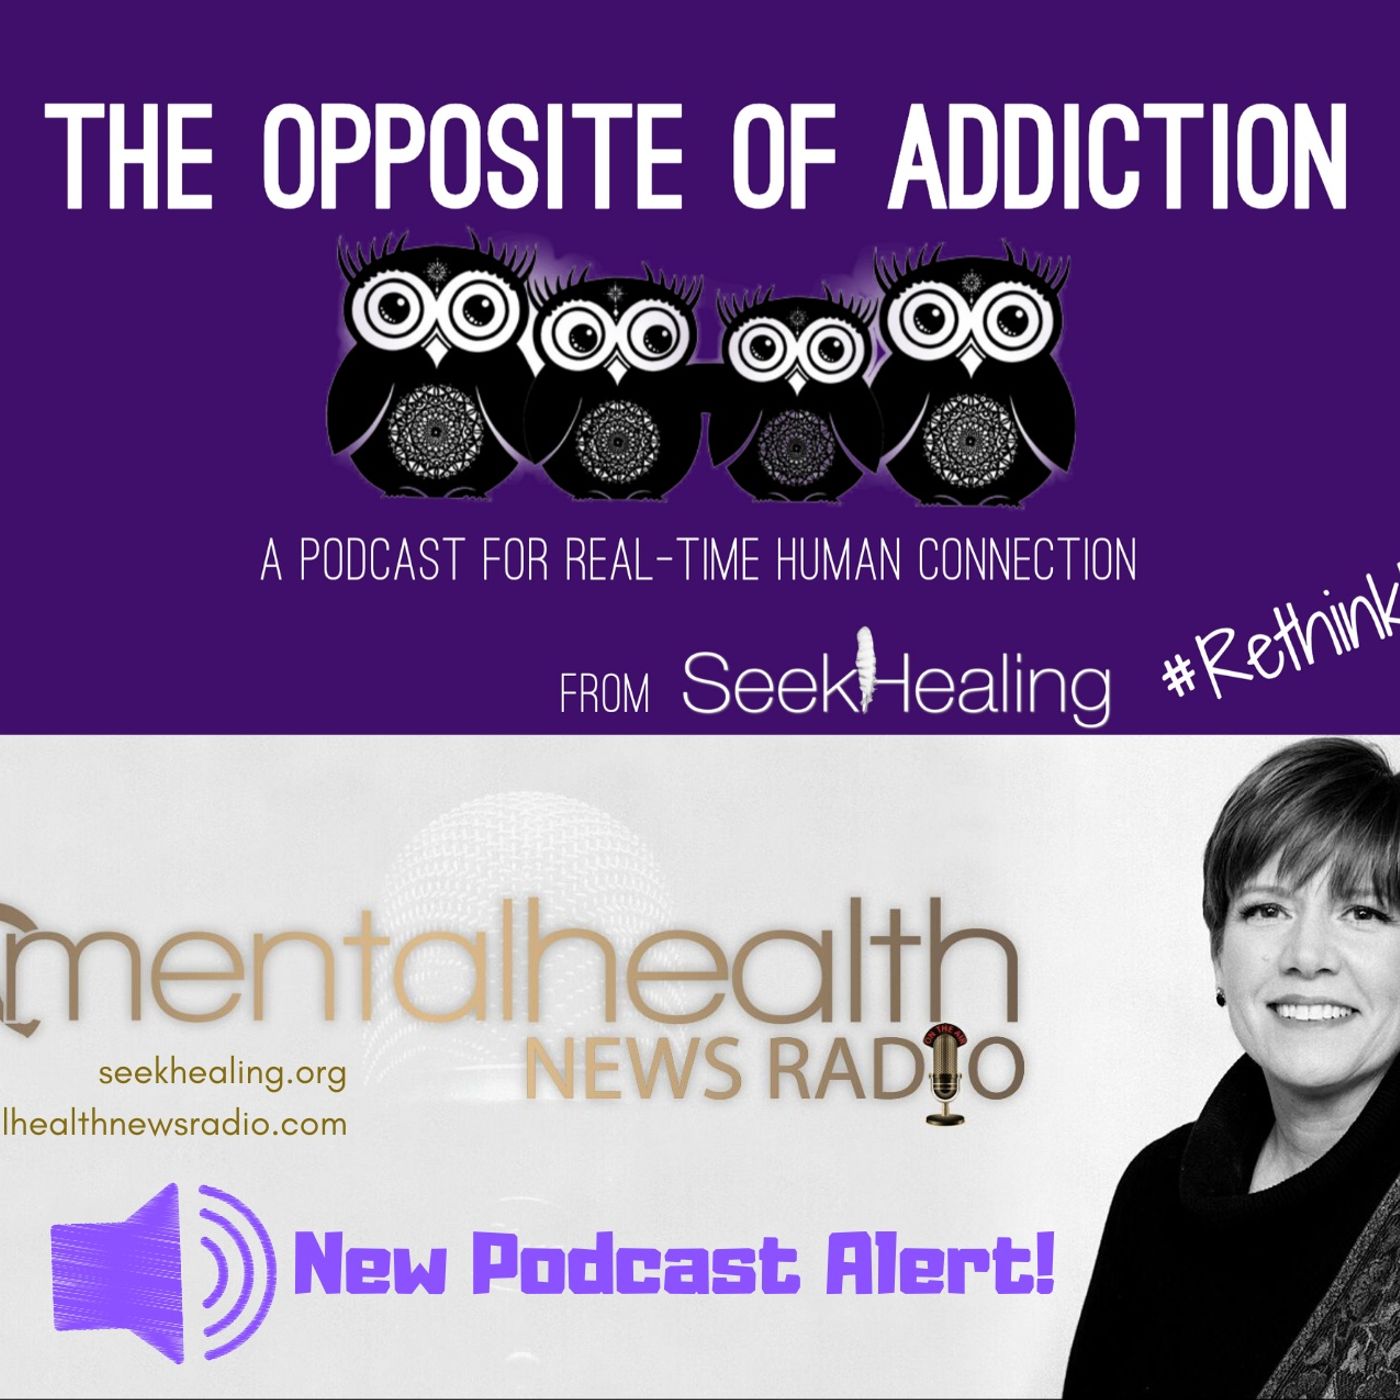 Mental Health News Radio - The Opposite of Addiction is Connection